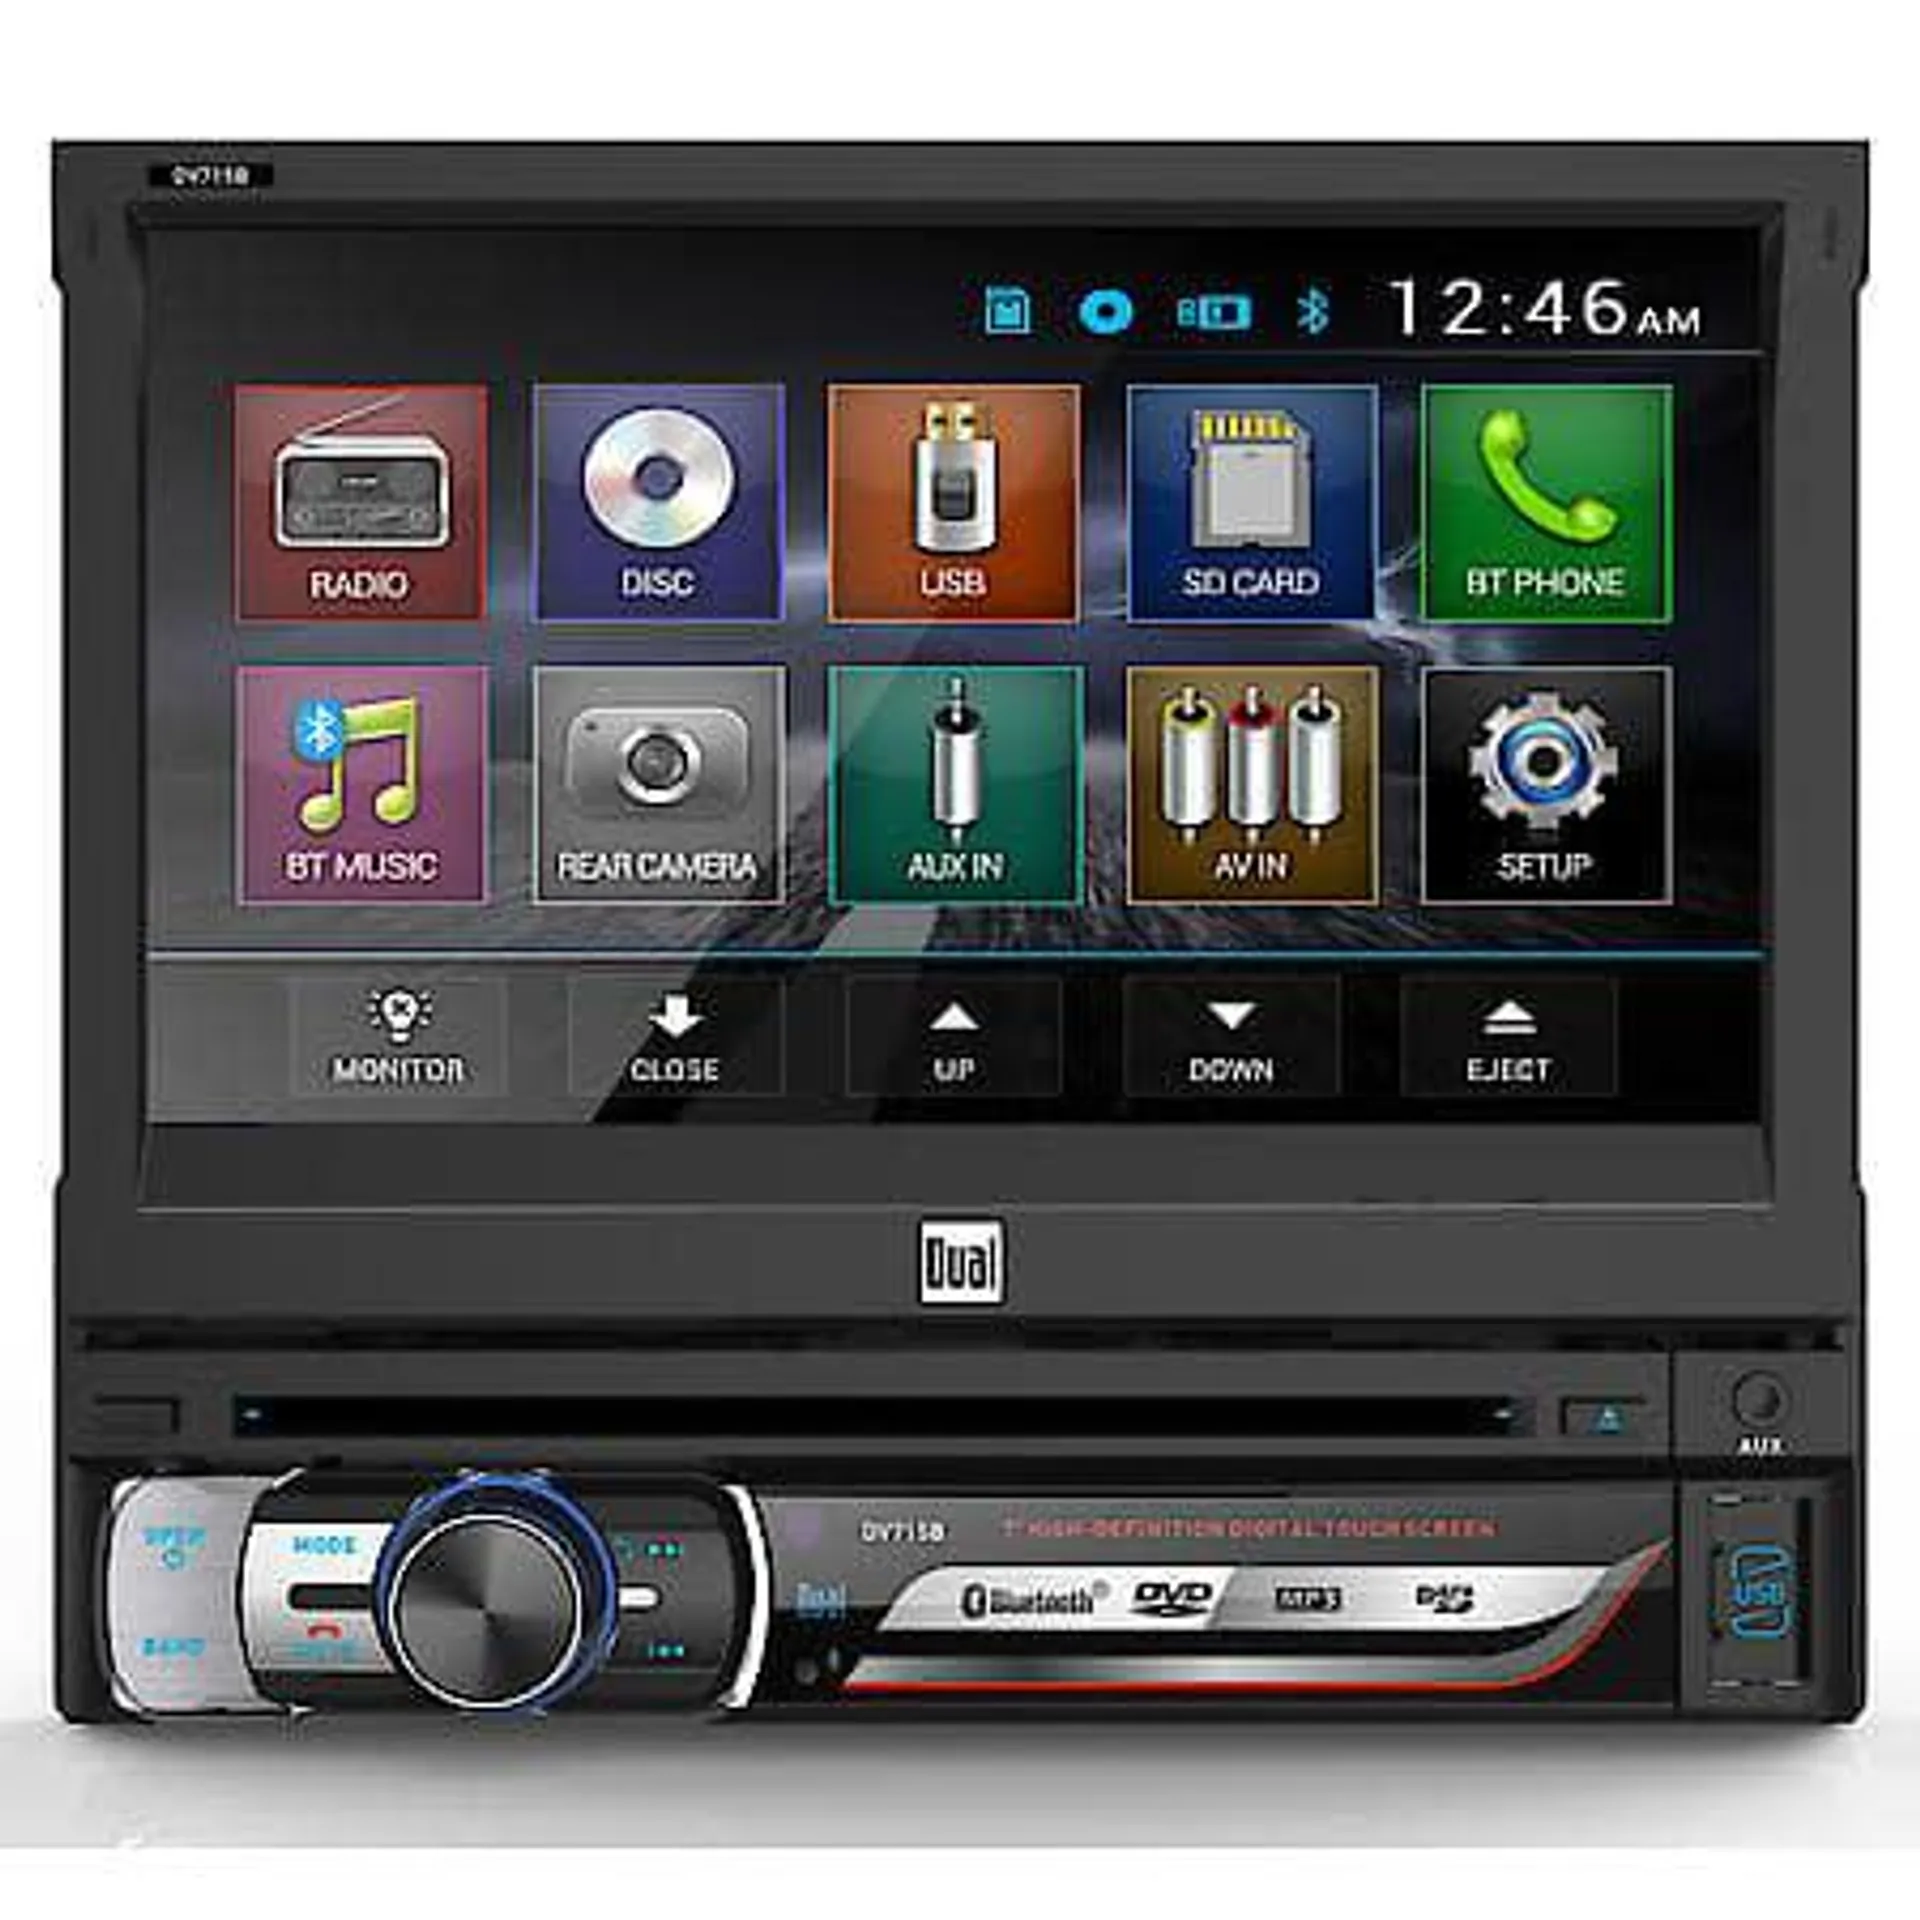 Single Din Car Stereo: 7" Touchscreen, DVD Player, Bluetooth, Music Streaming, Hands Free Calling